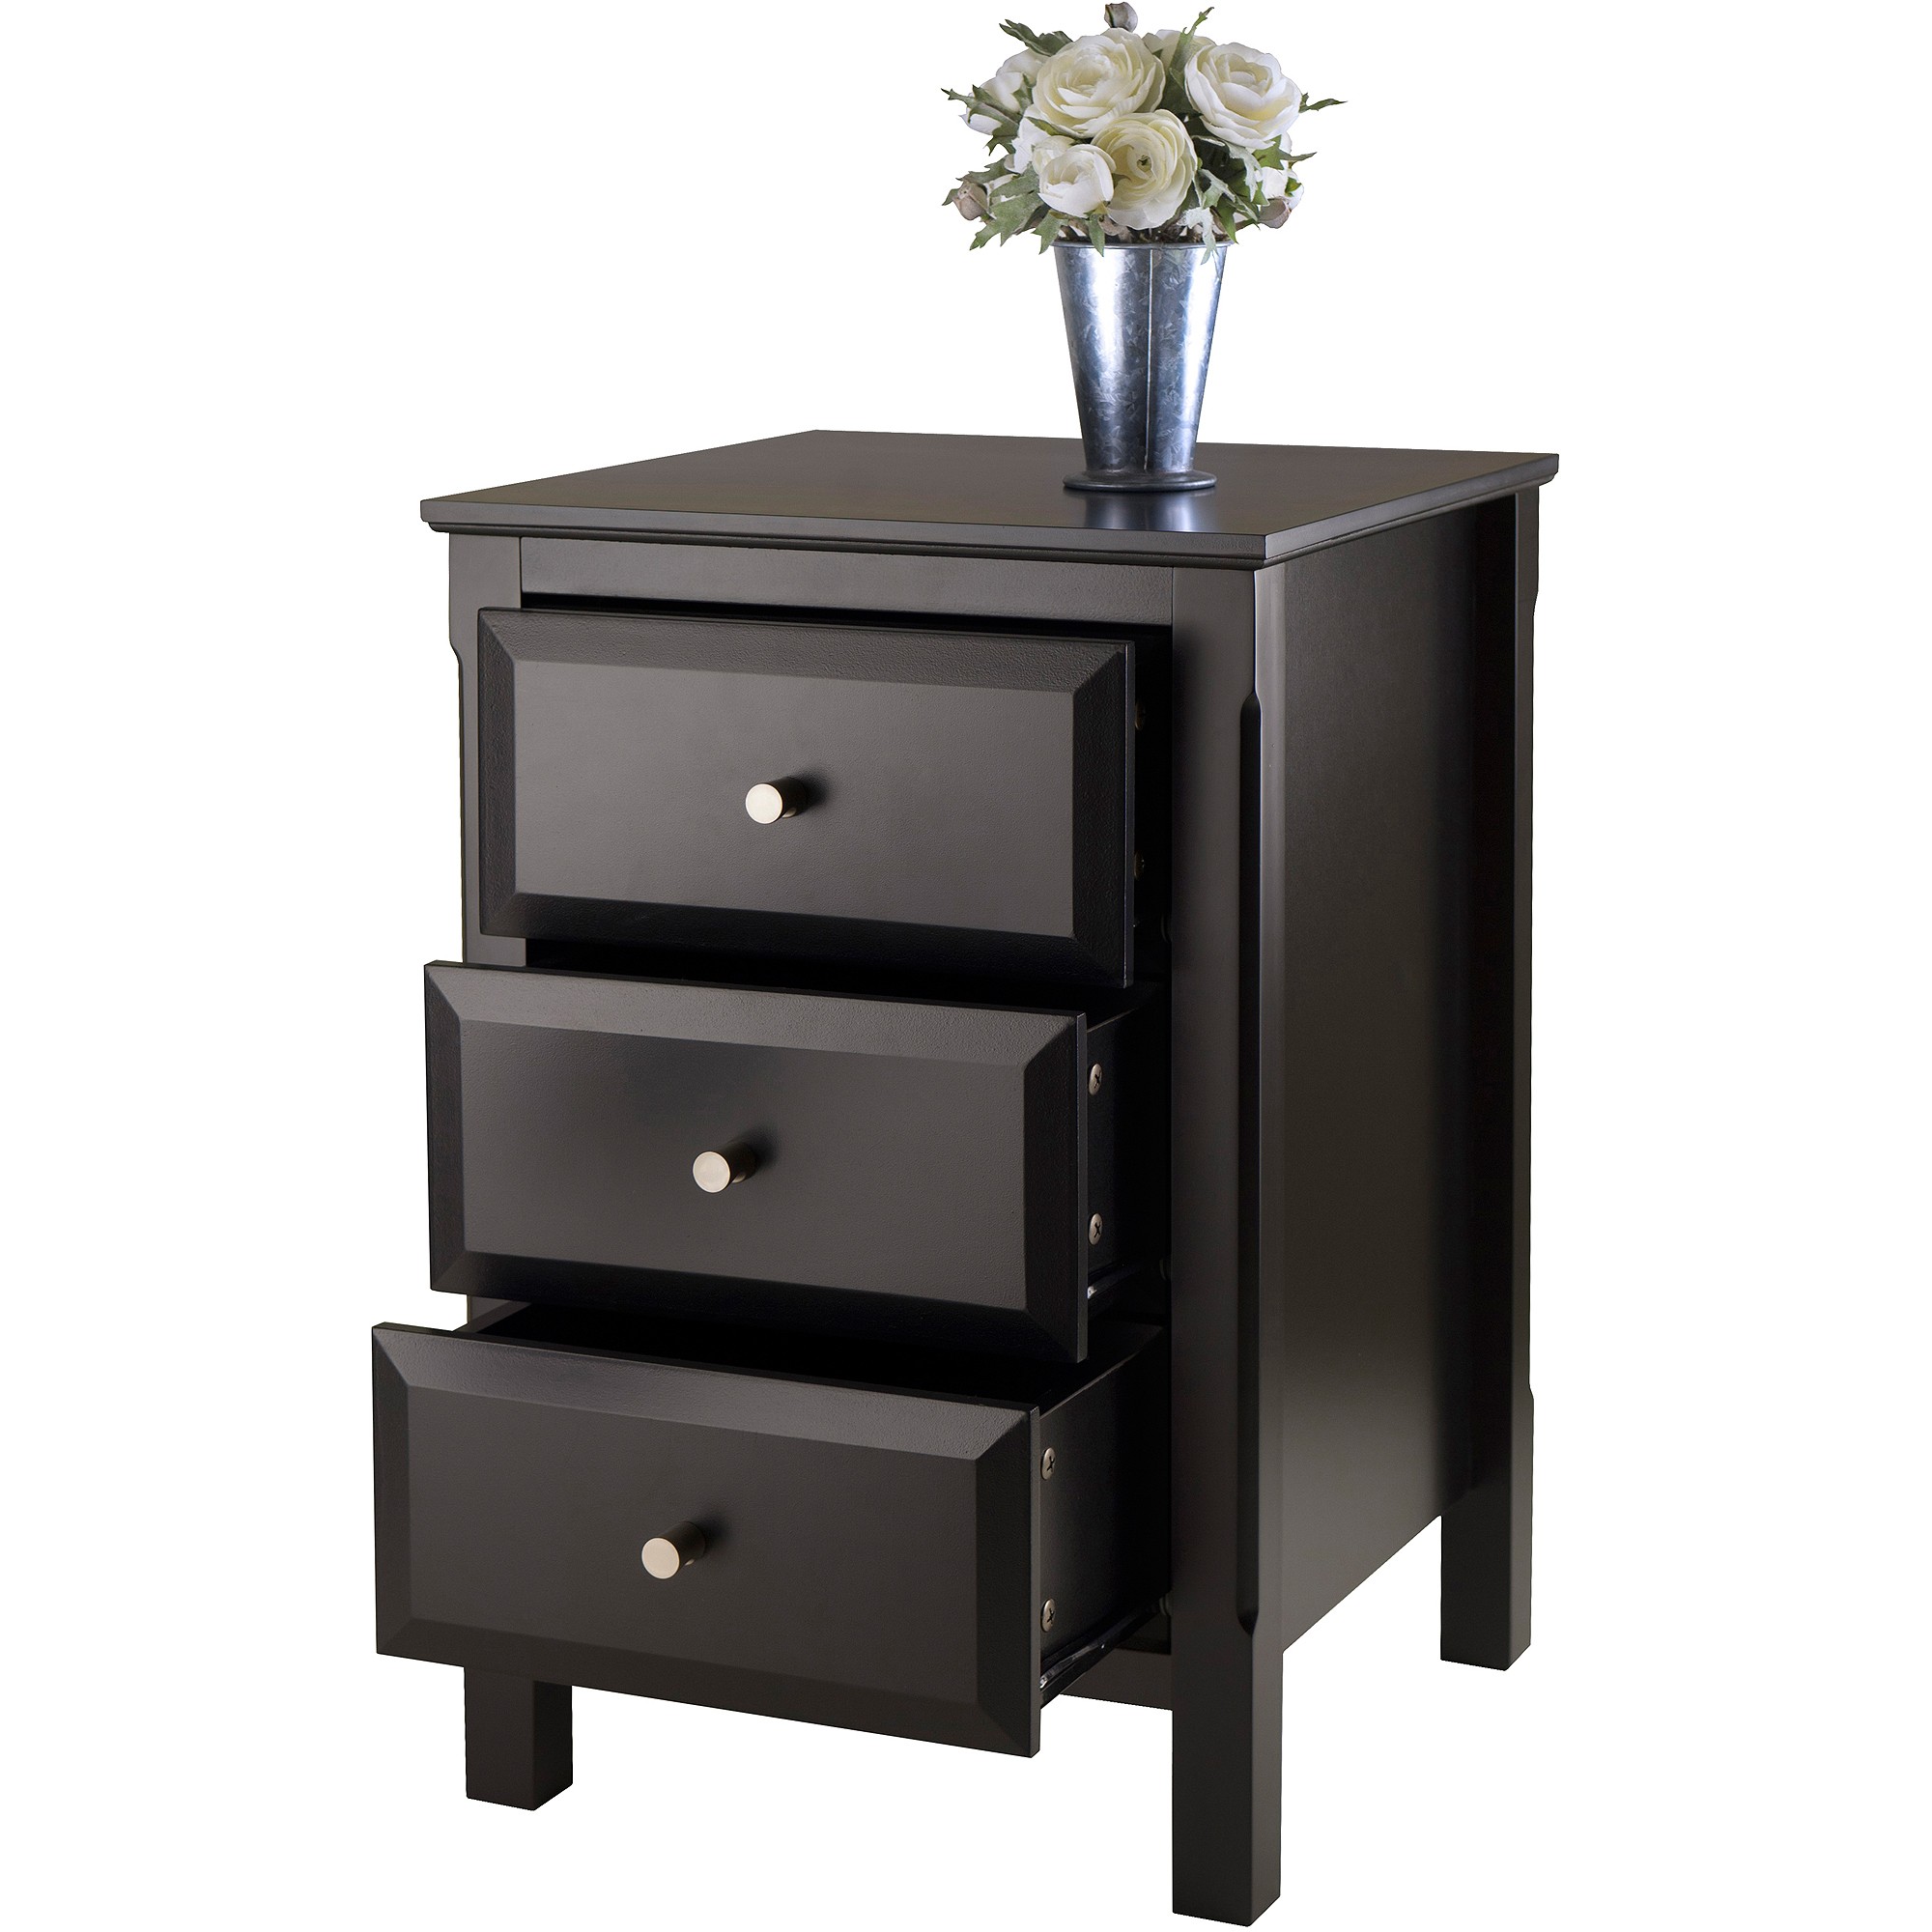 winsome timmy nightstand accent table black with drawers burgundy runner kitchen furniture kohls wall clocks large umbrella bedside charging station globe lighting bar style round